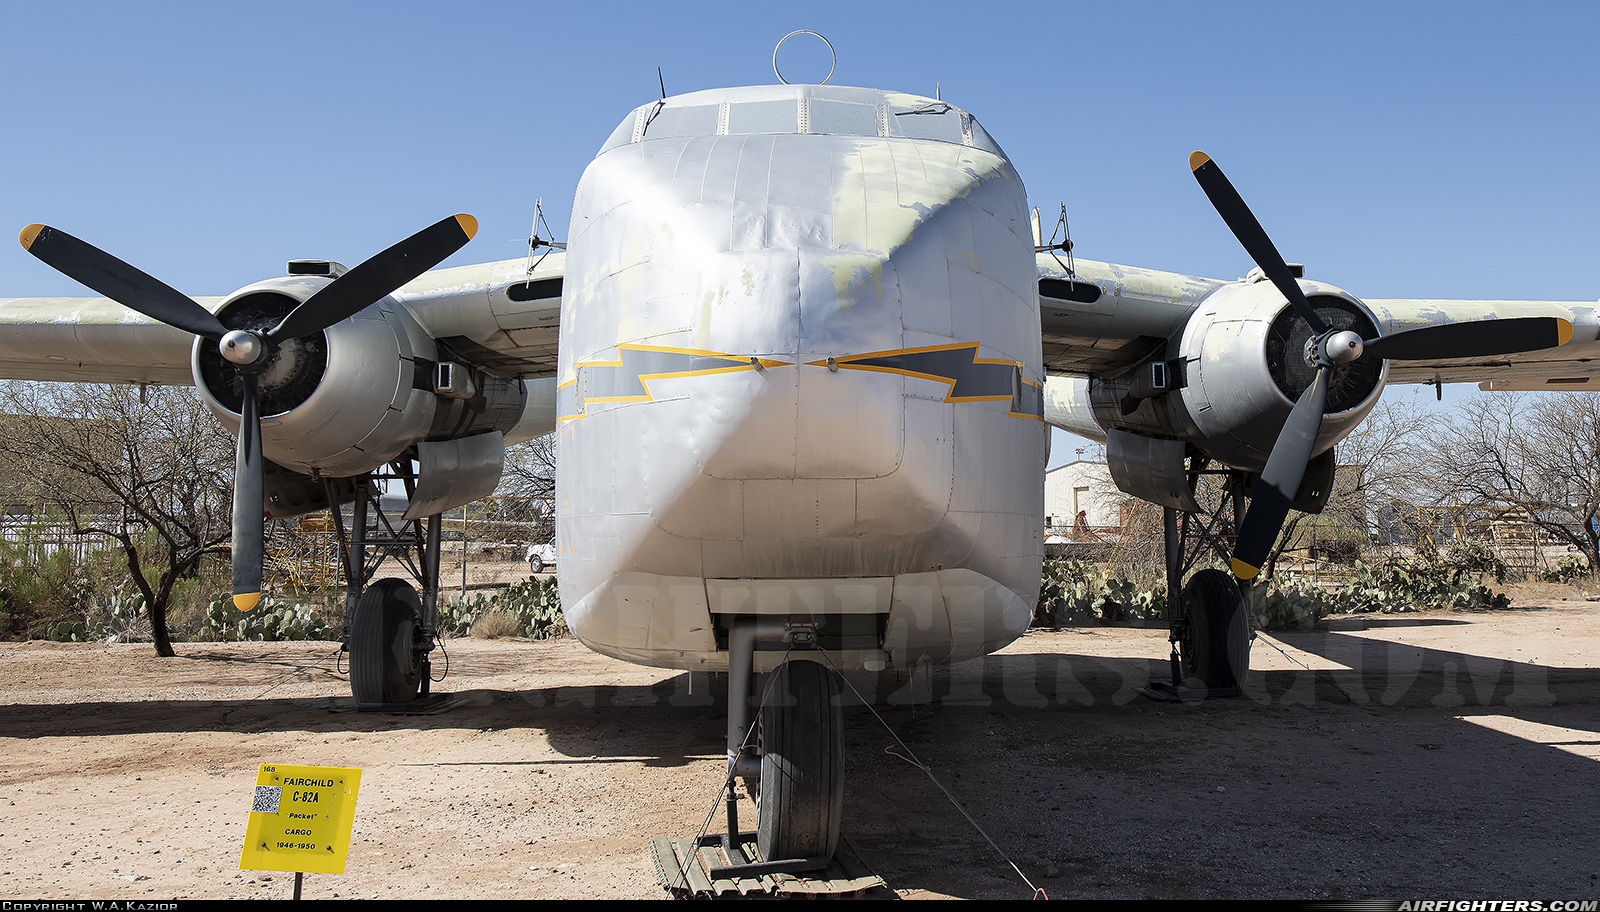 USA - Air Force Fairchild C-82A Packet 44-23006 at Tucson - Pima Air and Space Museum, USA